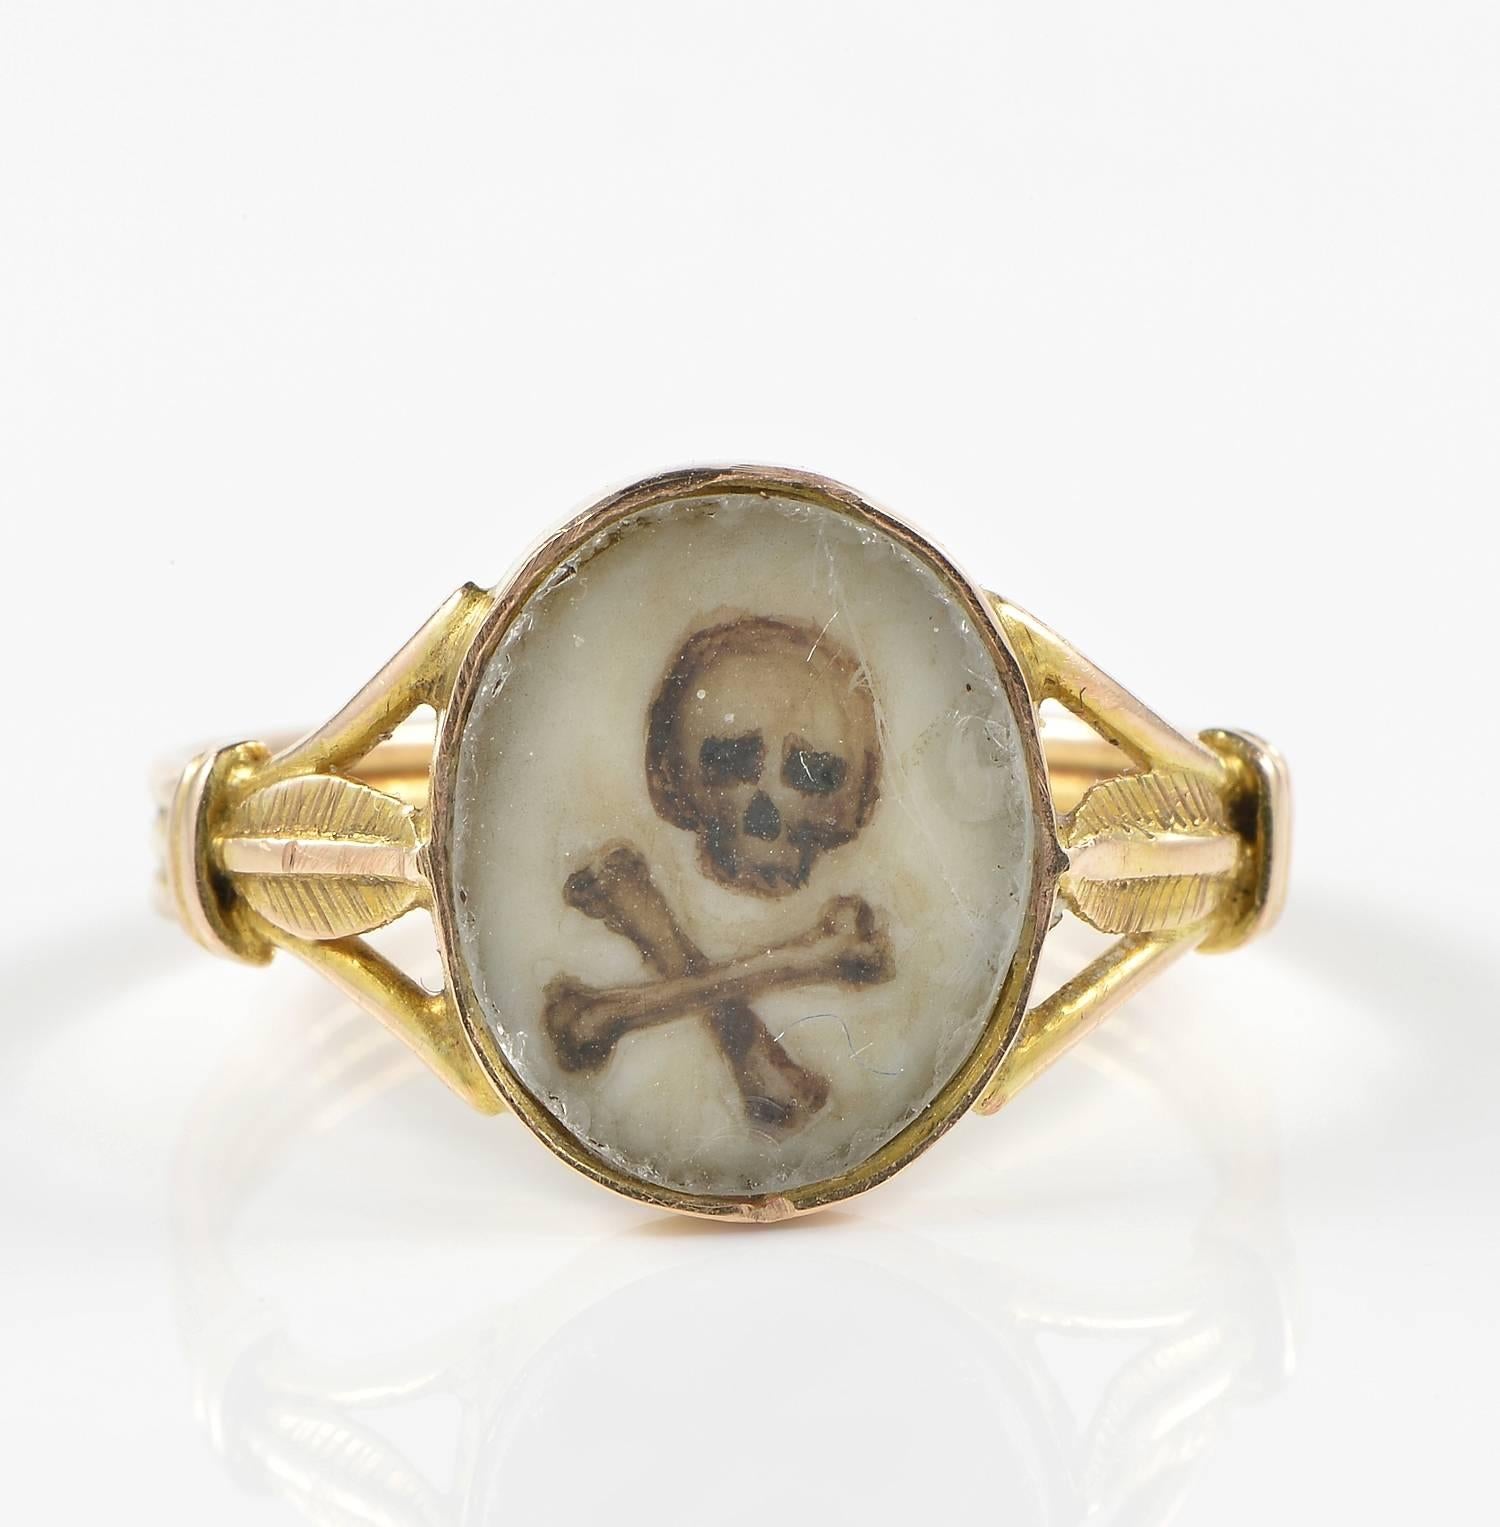 
Memento Mori stands for “remember you must die” the skull motif is a prominent motif of the Memento Mori, only jewellery can convey a harsh reality in such an elegant form as expression of people mortality

Authentic pre - Georgian Stuart period